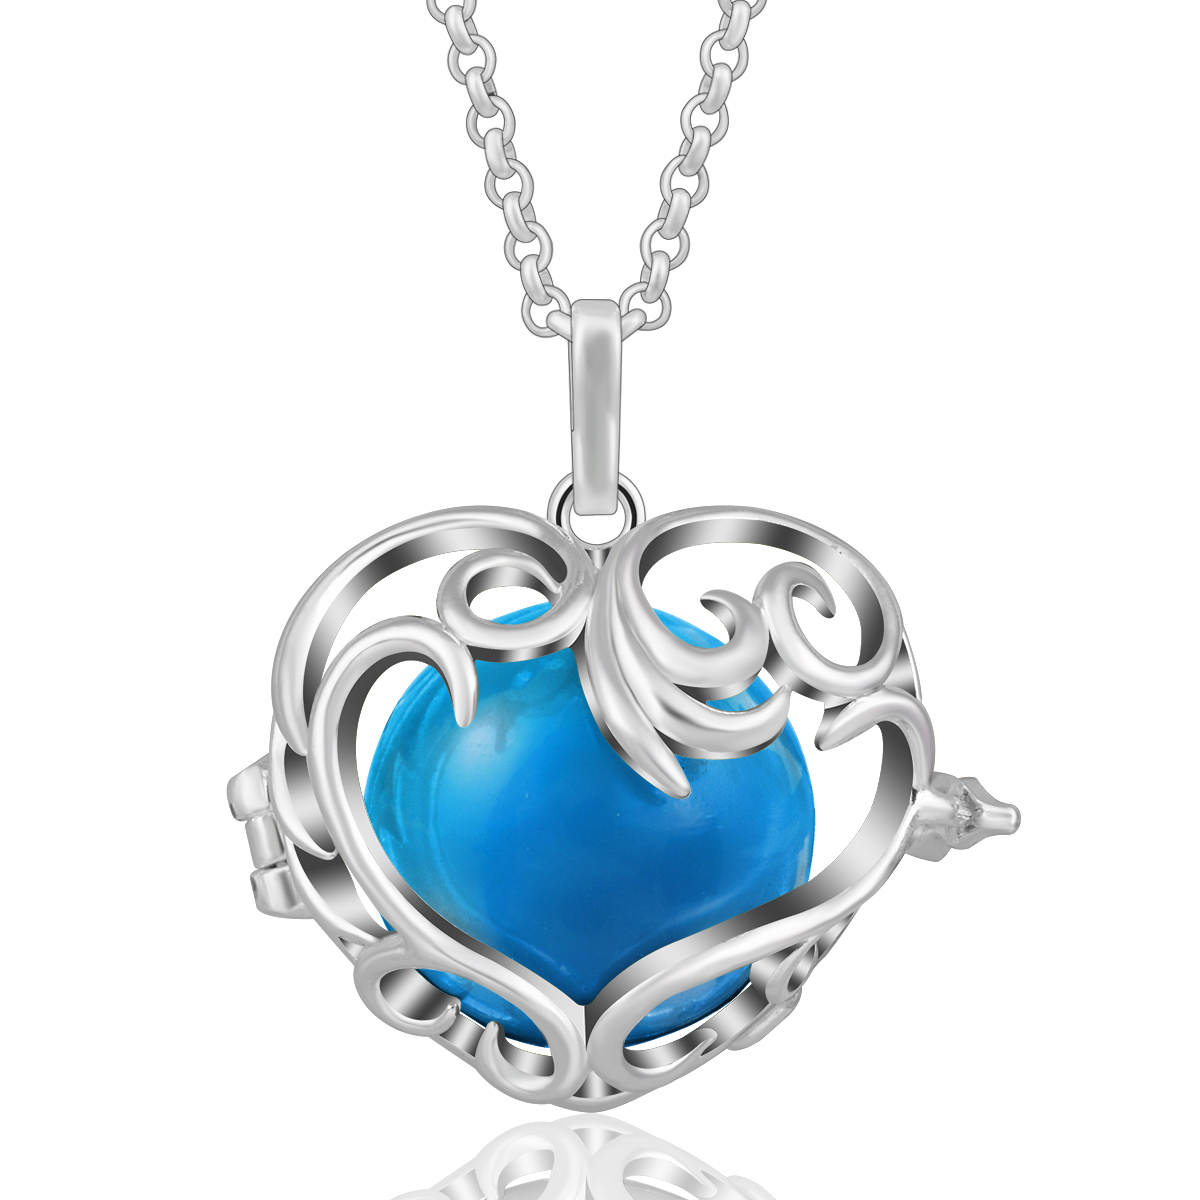 Merryshine Jewelry Wholesale Mexican Style Silver Heart Cage Pendant for Ladies Hot Selling Chime Ball